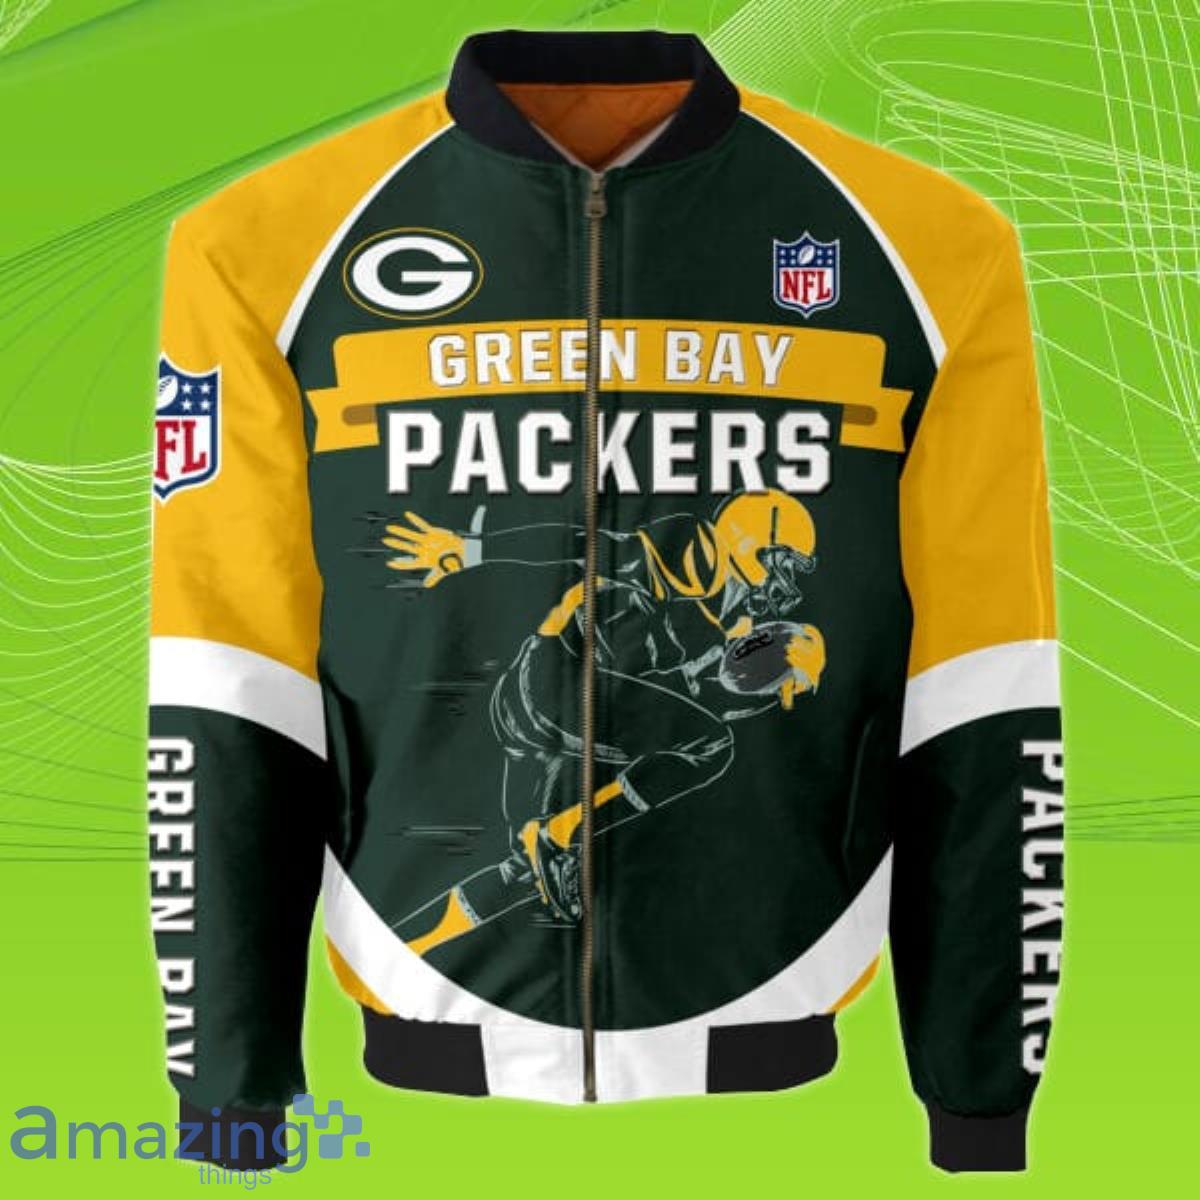 NFL Green Bay Packers Bomber Jacket Best Gift For Fans